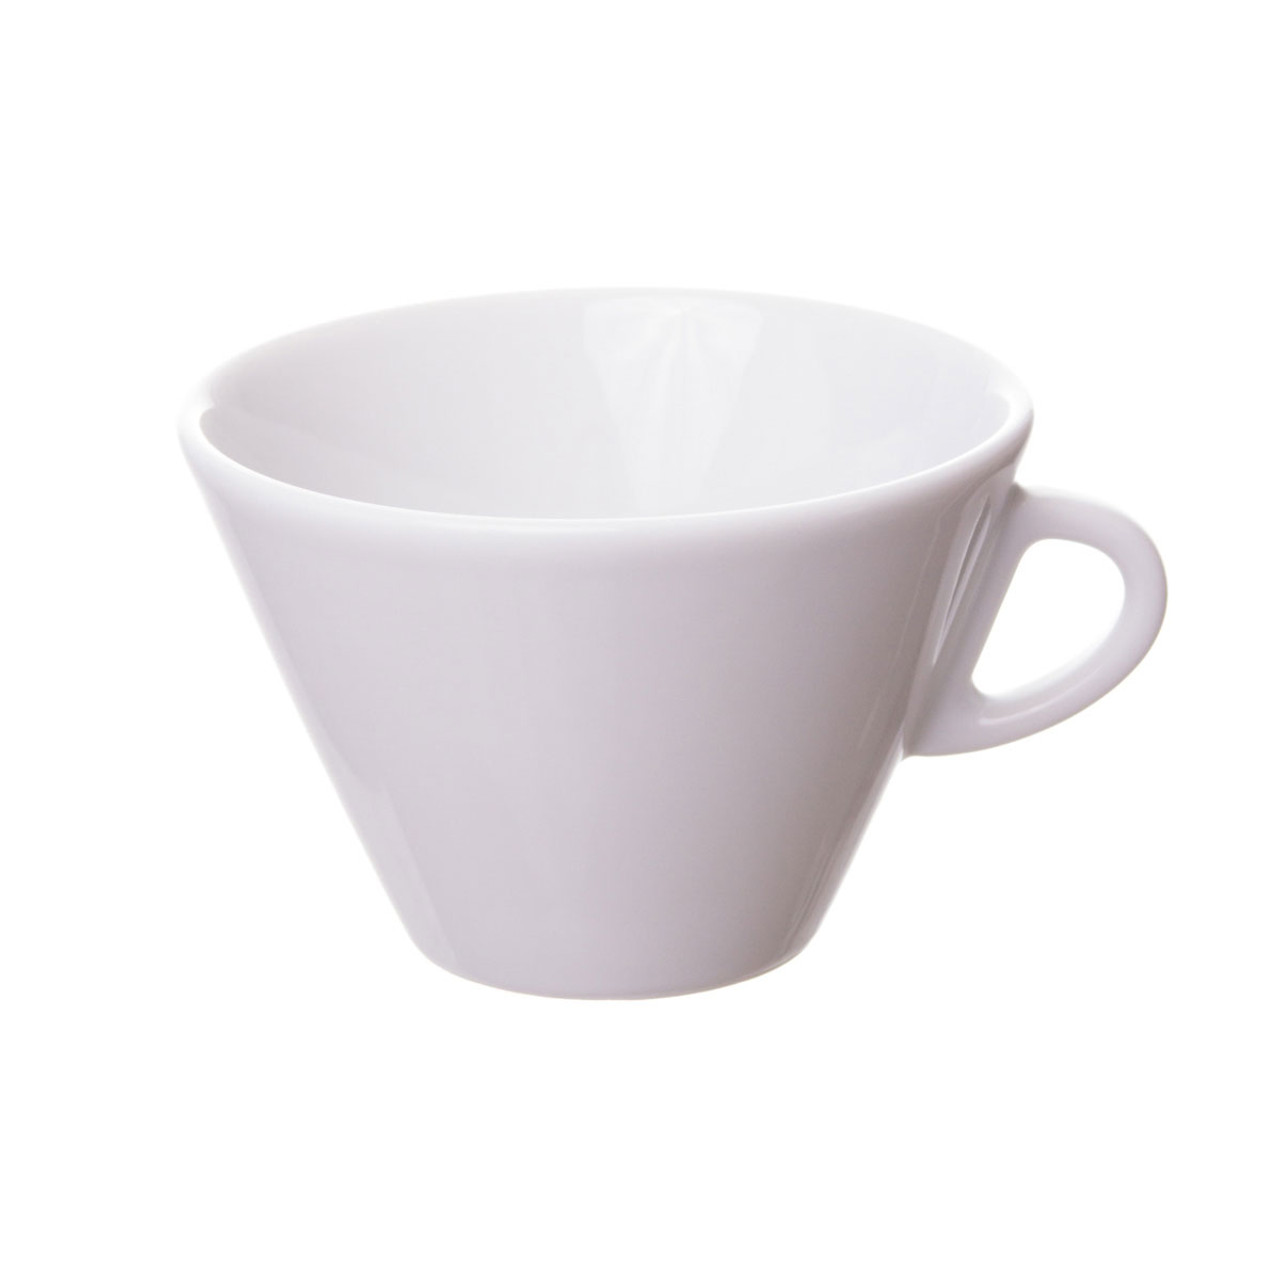 https://cdn11.bigcommerce.com/s-6h7ychjk4/images/stencil/1280x1280/products/7853/87967/favorita-9-point-1-ounce-latte-cup__74854.1597178503.jpg?c=1&imbypass=on